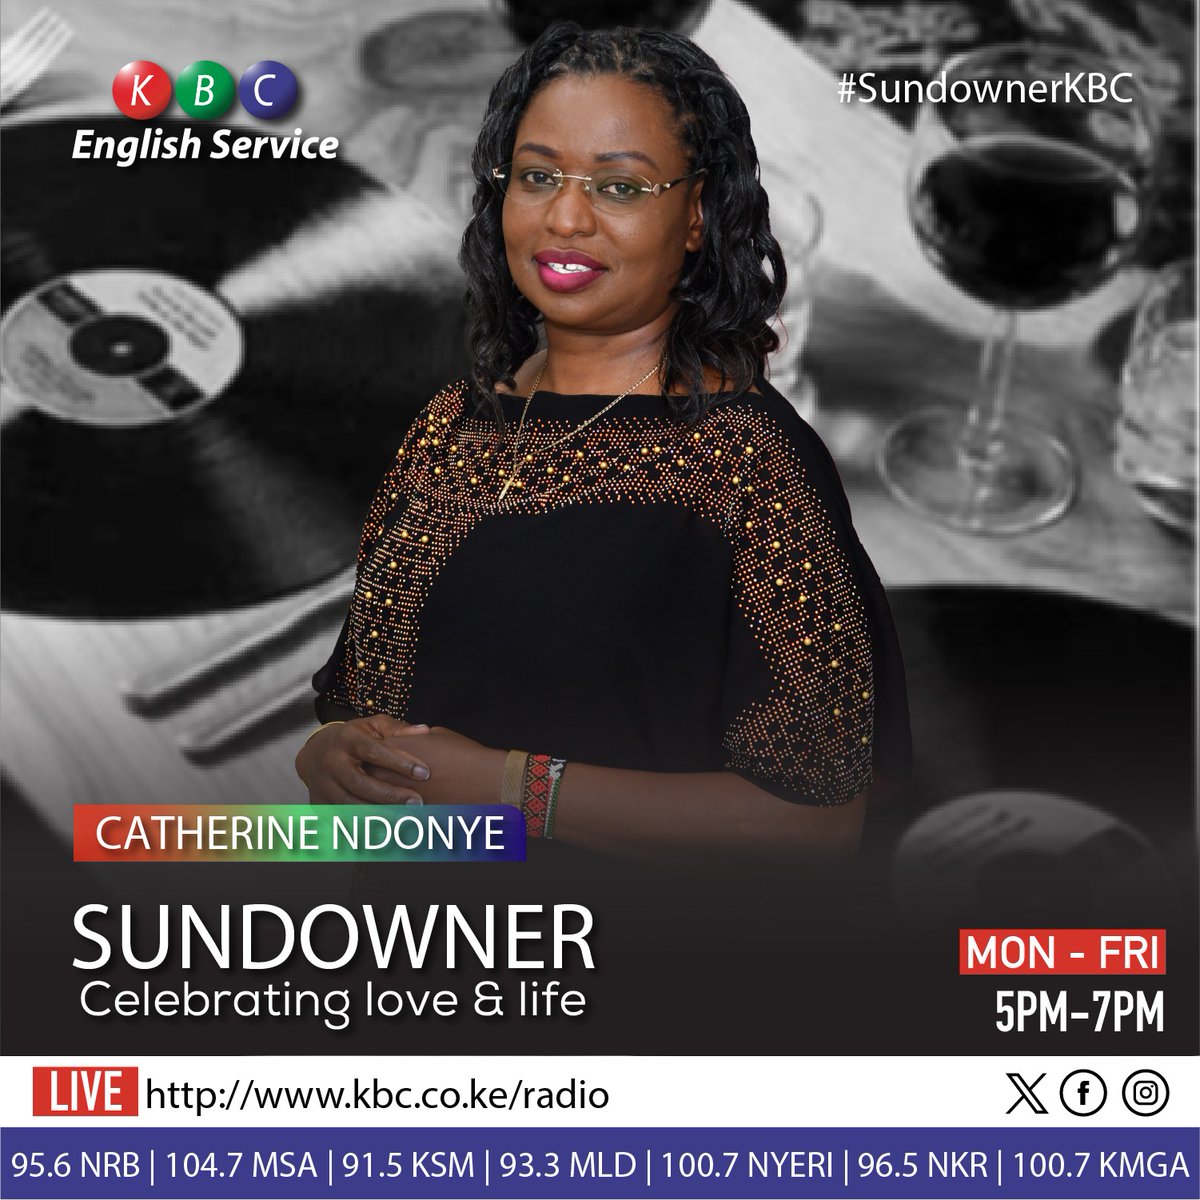 'Thoughts become things..so choose the good ones!'~Mike Dooley. Where are you choosing us from? #SundownerKBC Behold your Captain:@CatherineNdonye Listen LIVE:kbc.co.ke/radio/